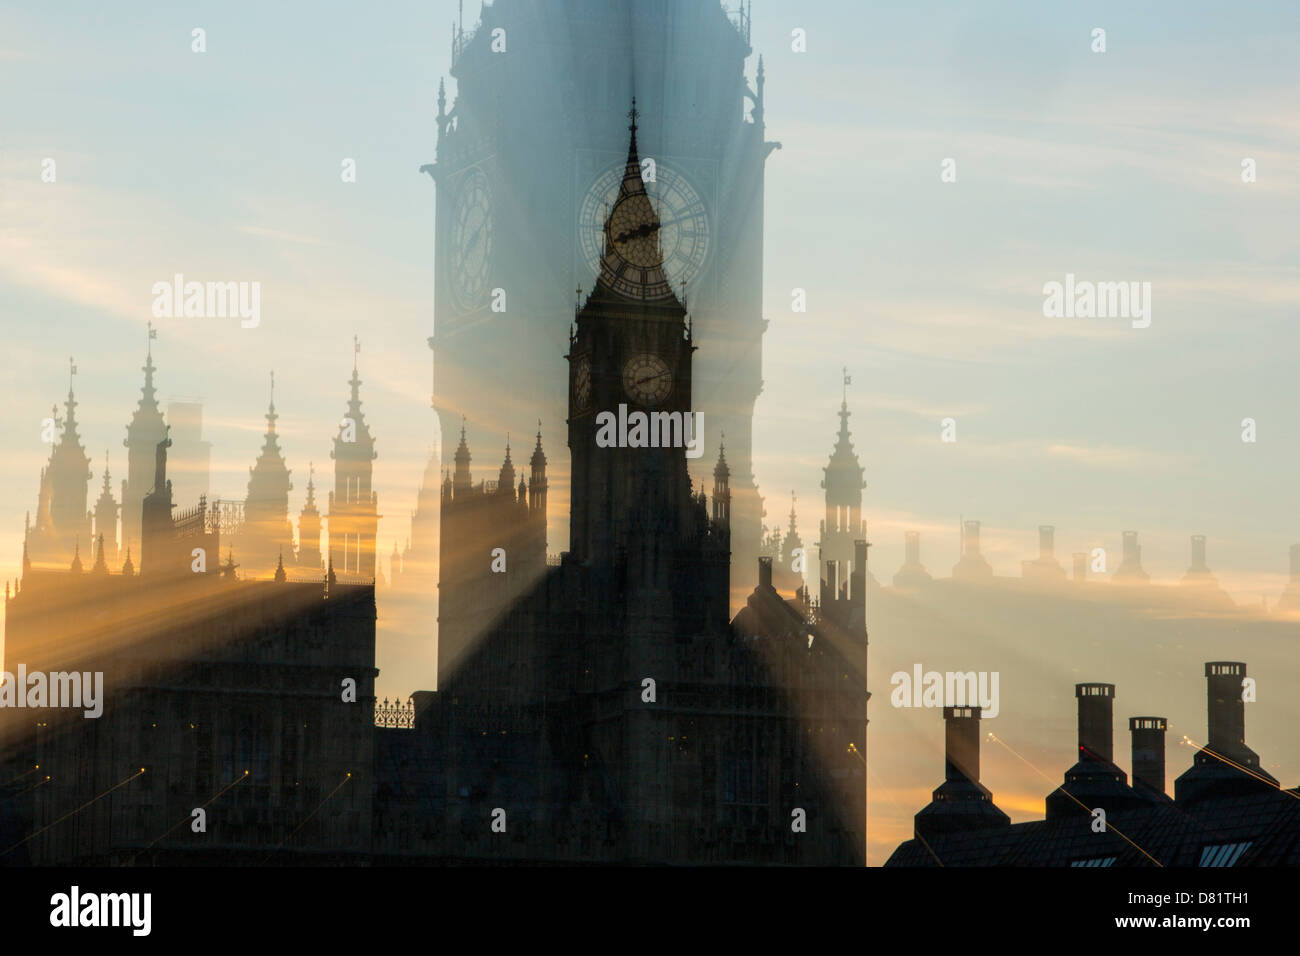 The Houses of Parliament and Big Ben in London, UK, at sunset. Stock Photo